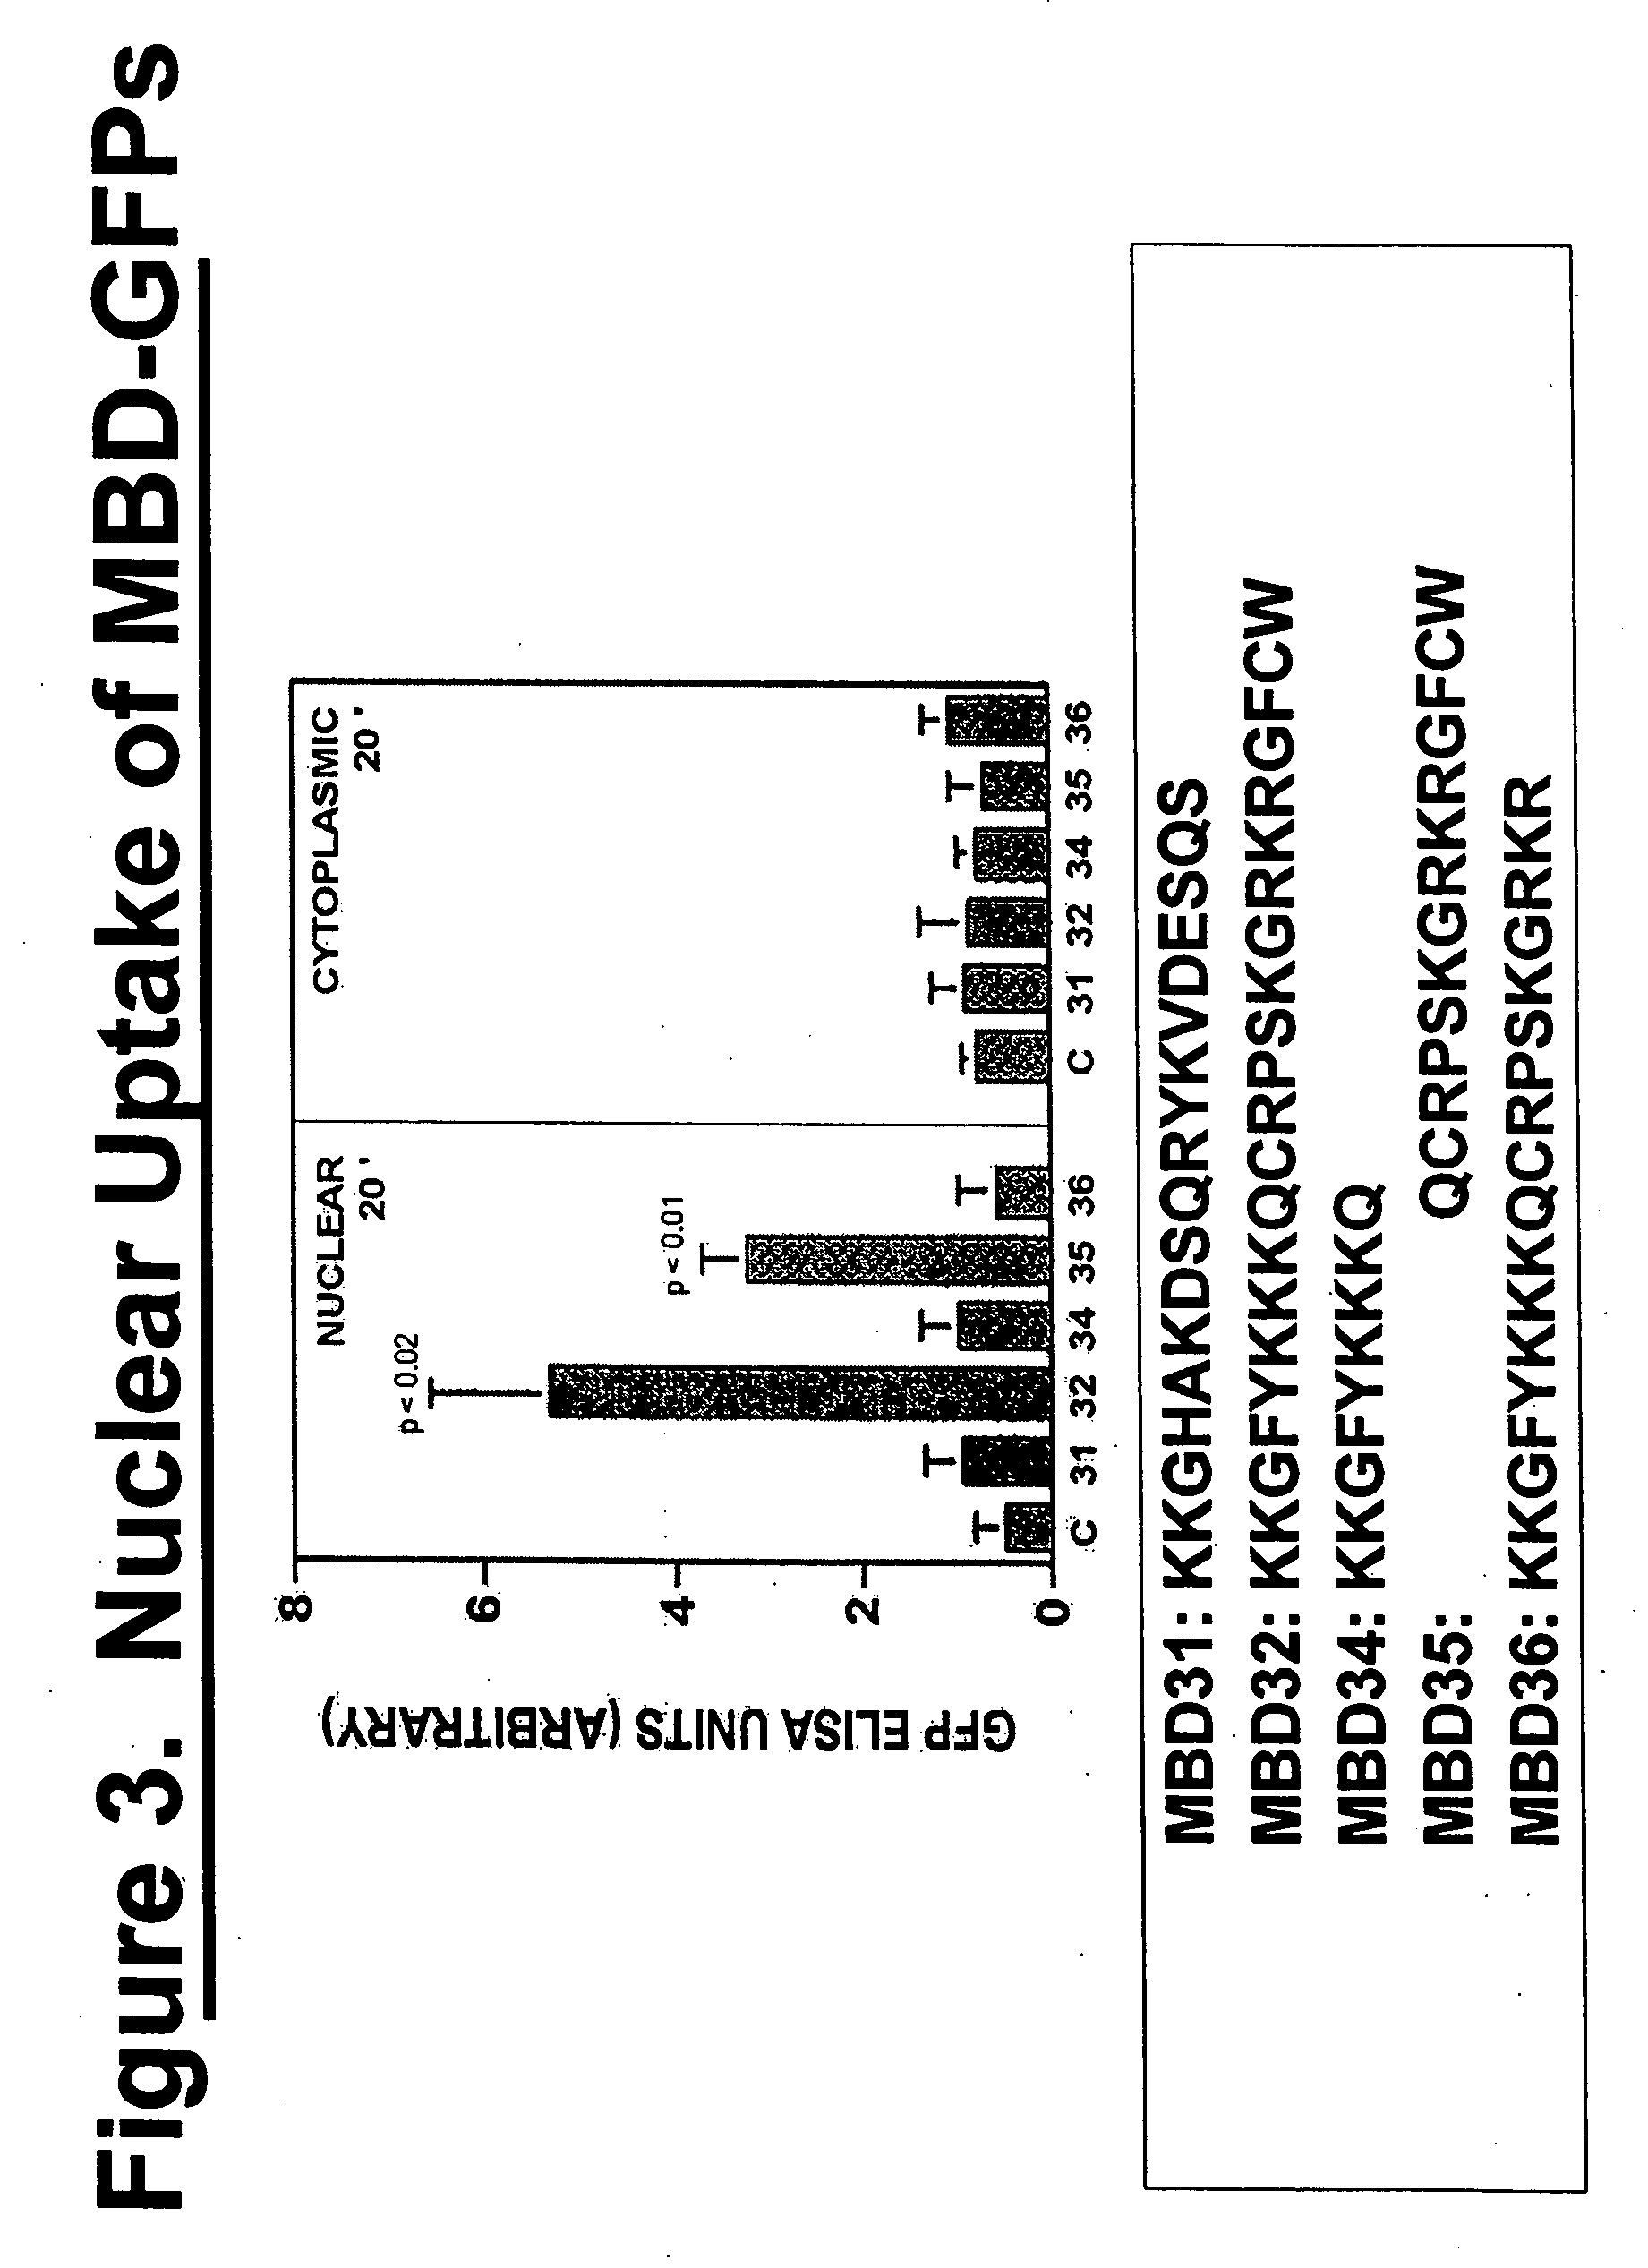 Methods for delivering MBD peptide-linked agent into cells under conditions of cellular stress